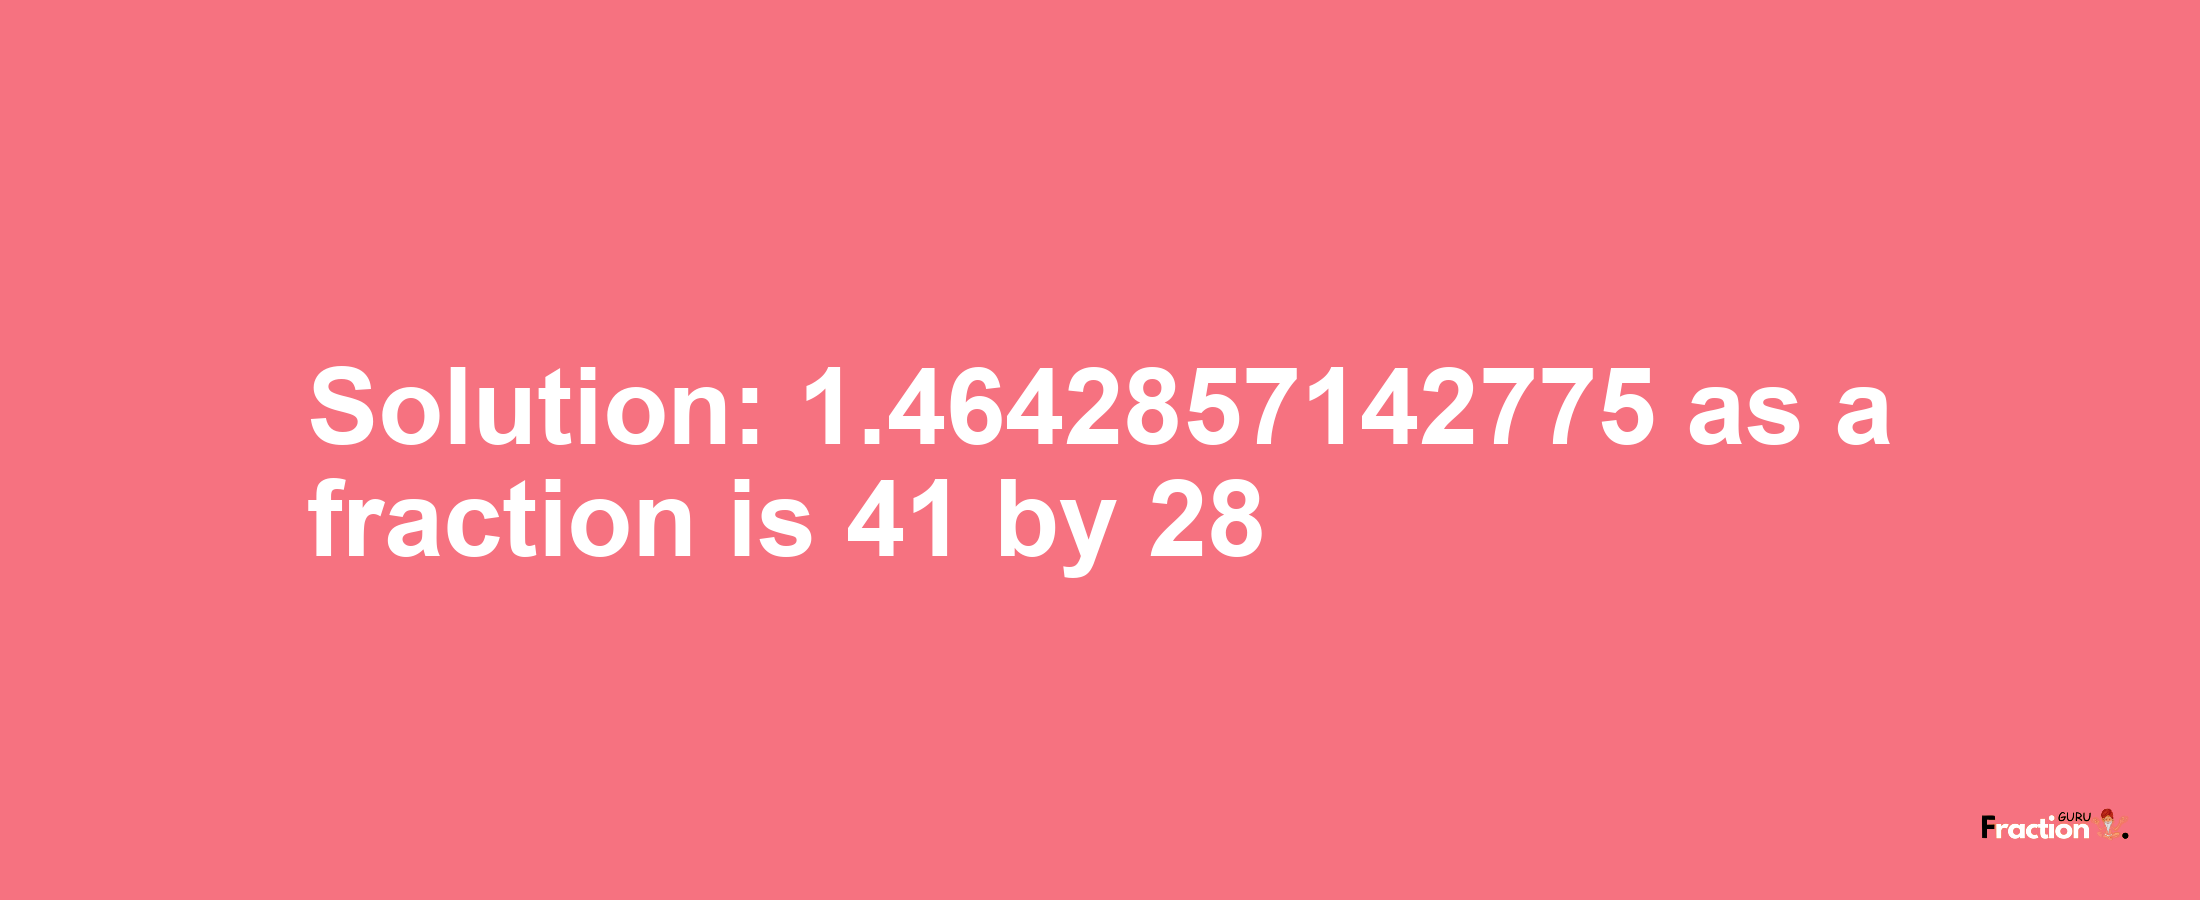 Solution:1.4642857142775 as a fraction is 41/28